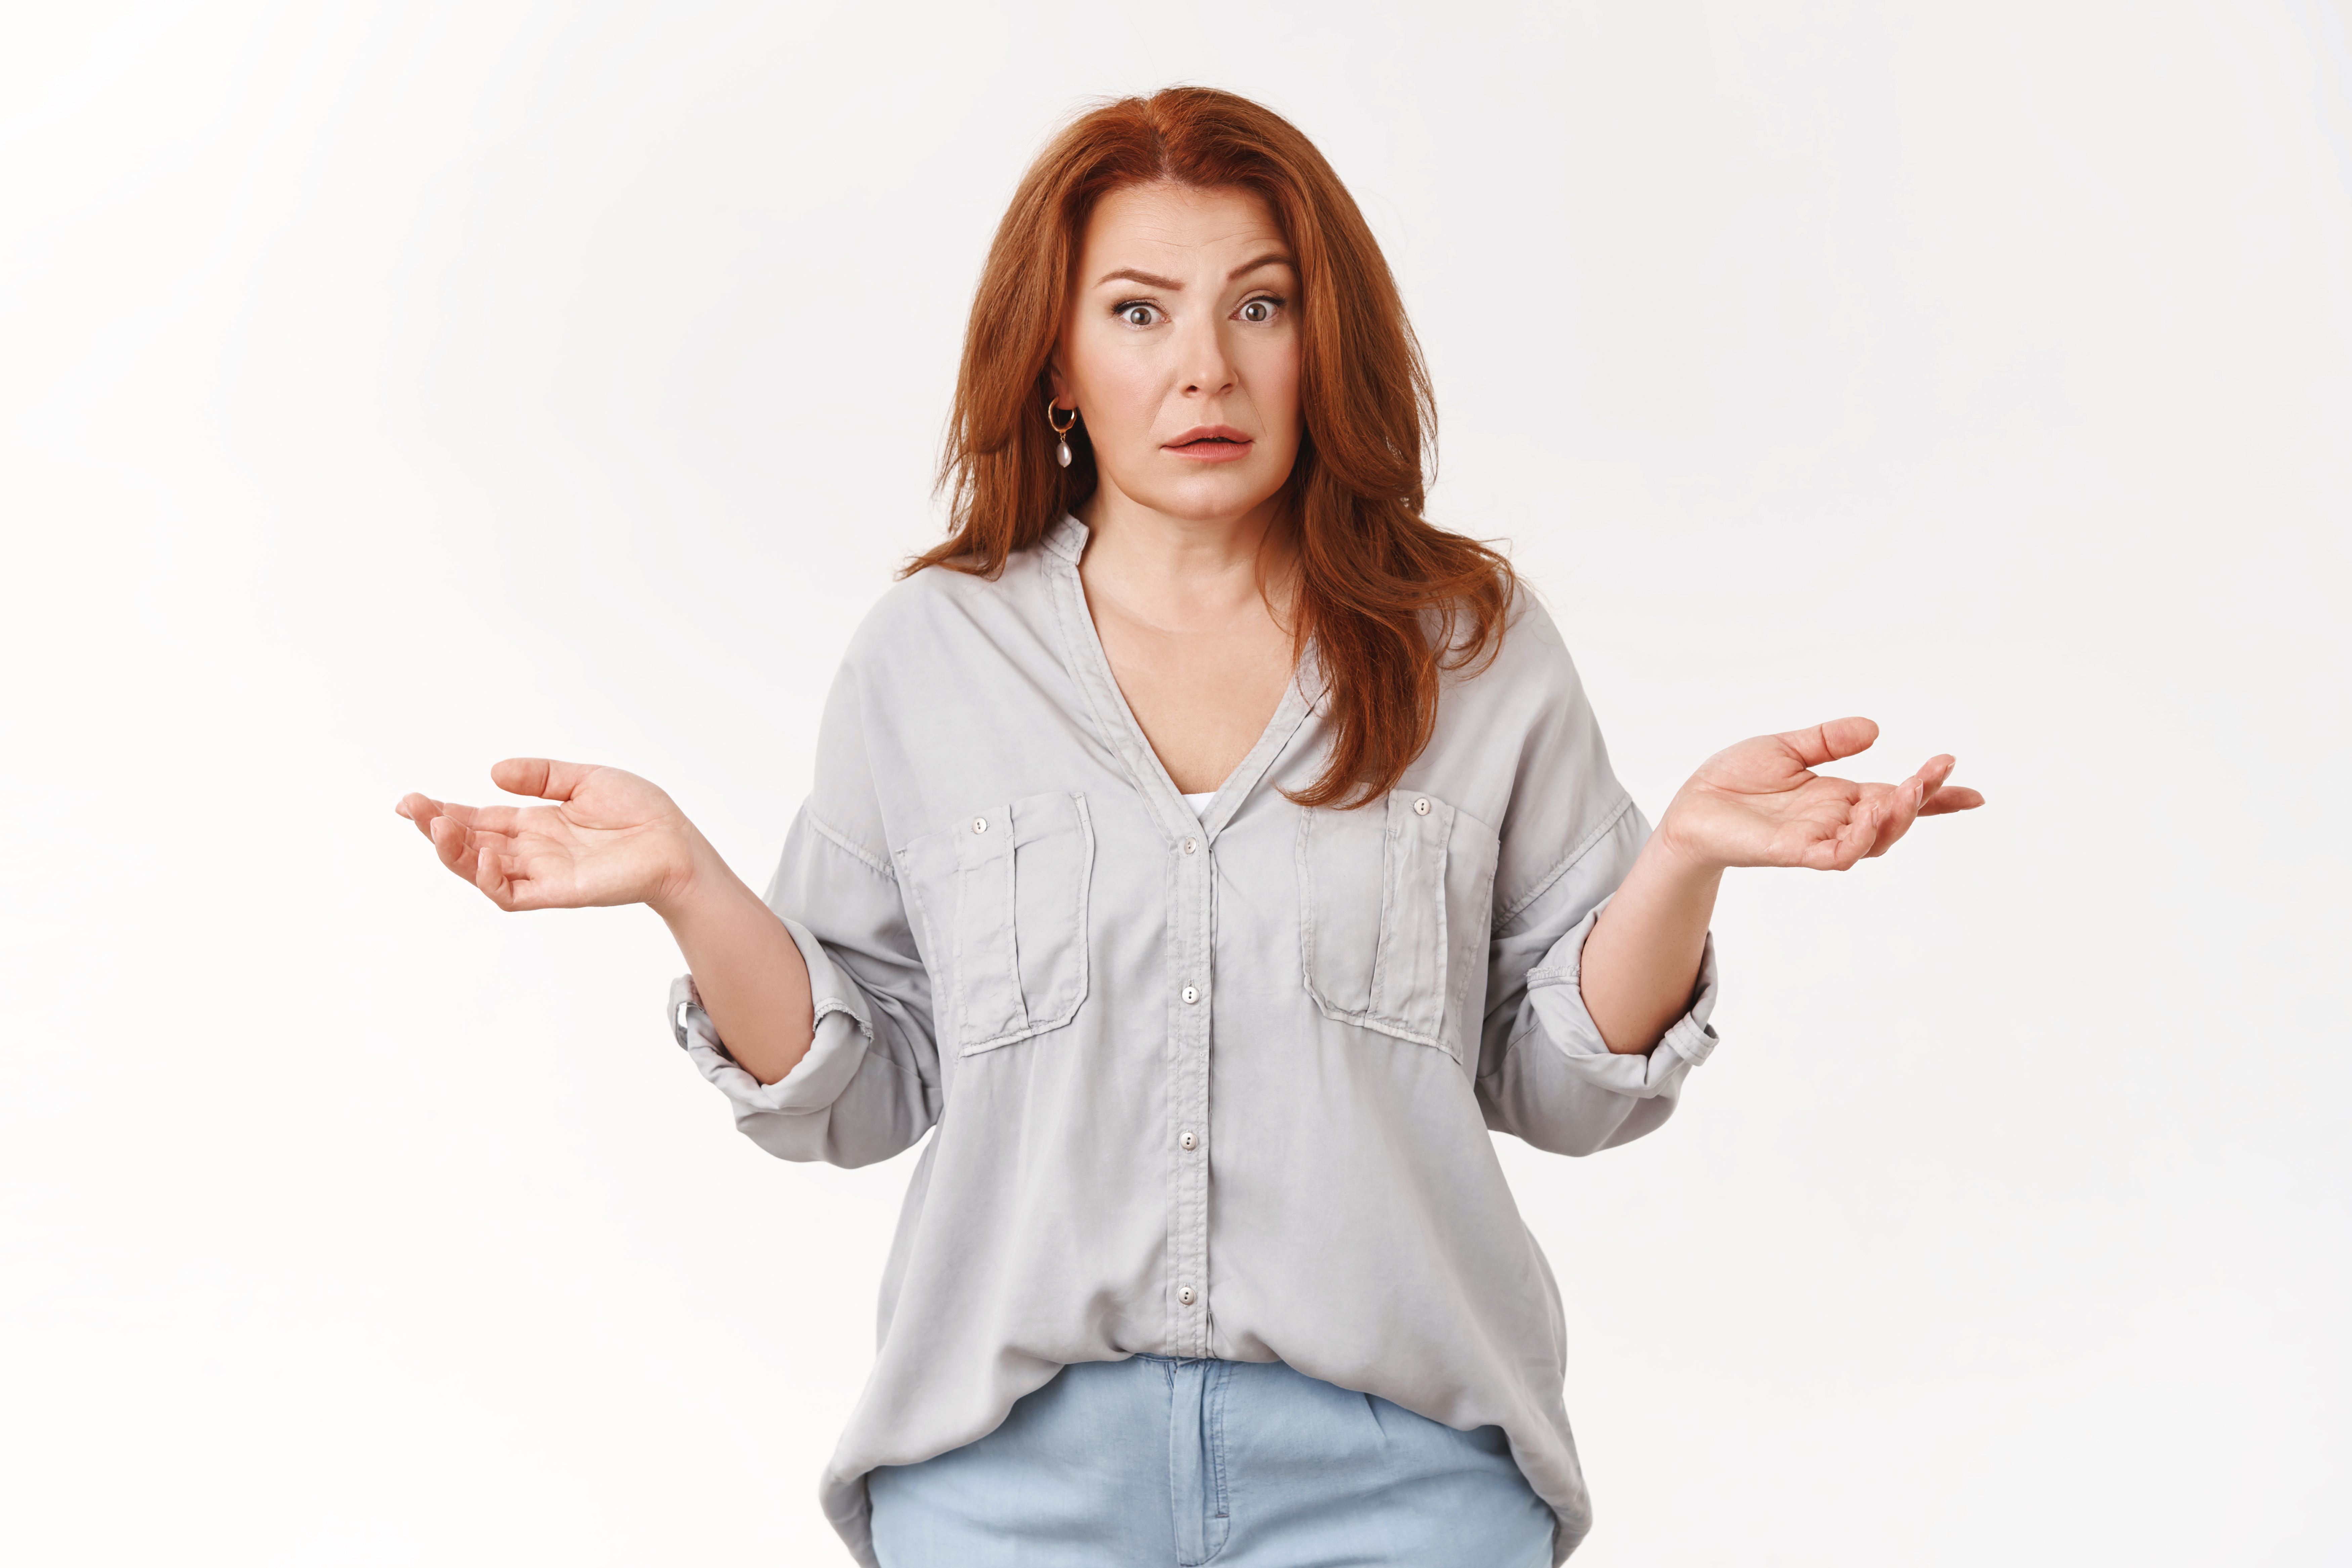 A confused woman with her hands pointed up | Source: Shutterstock